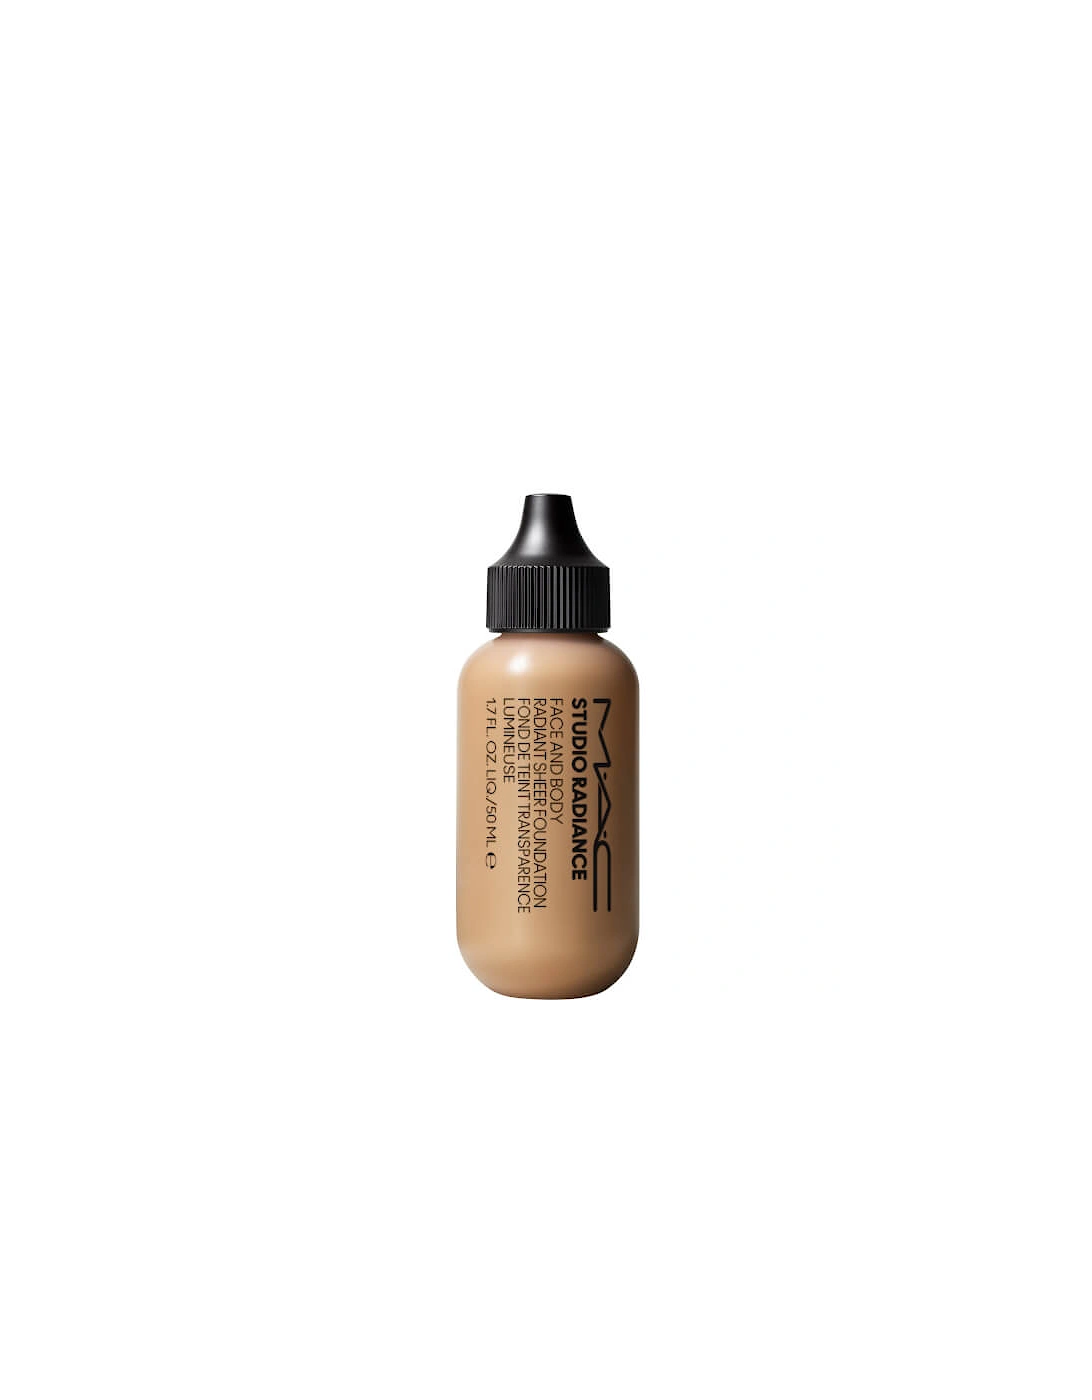 Studio Face and Body Radiant Sheer Foundation - C3, 2 of 1